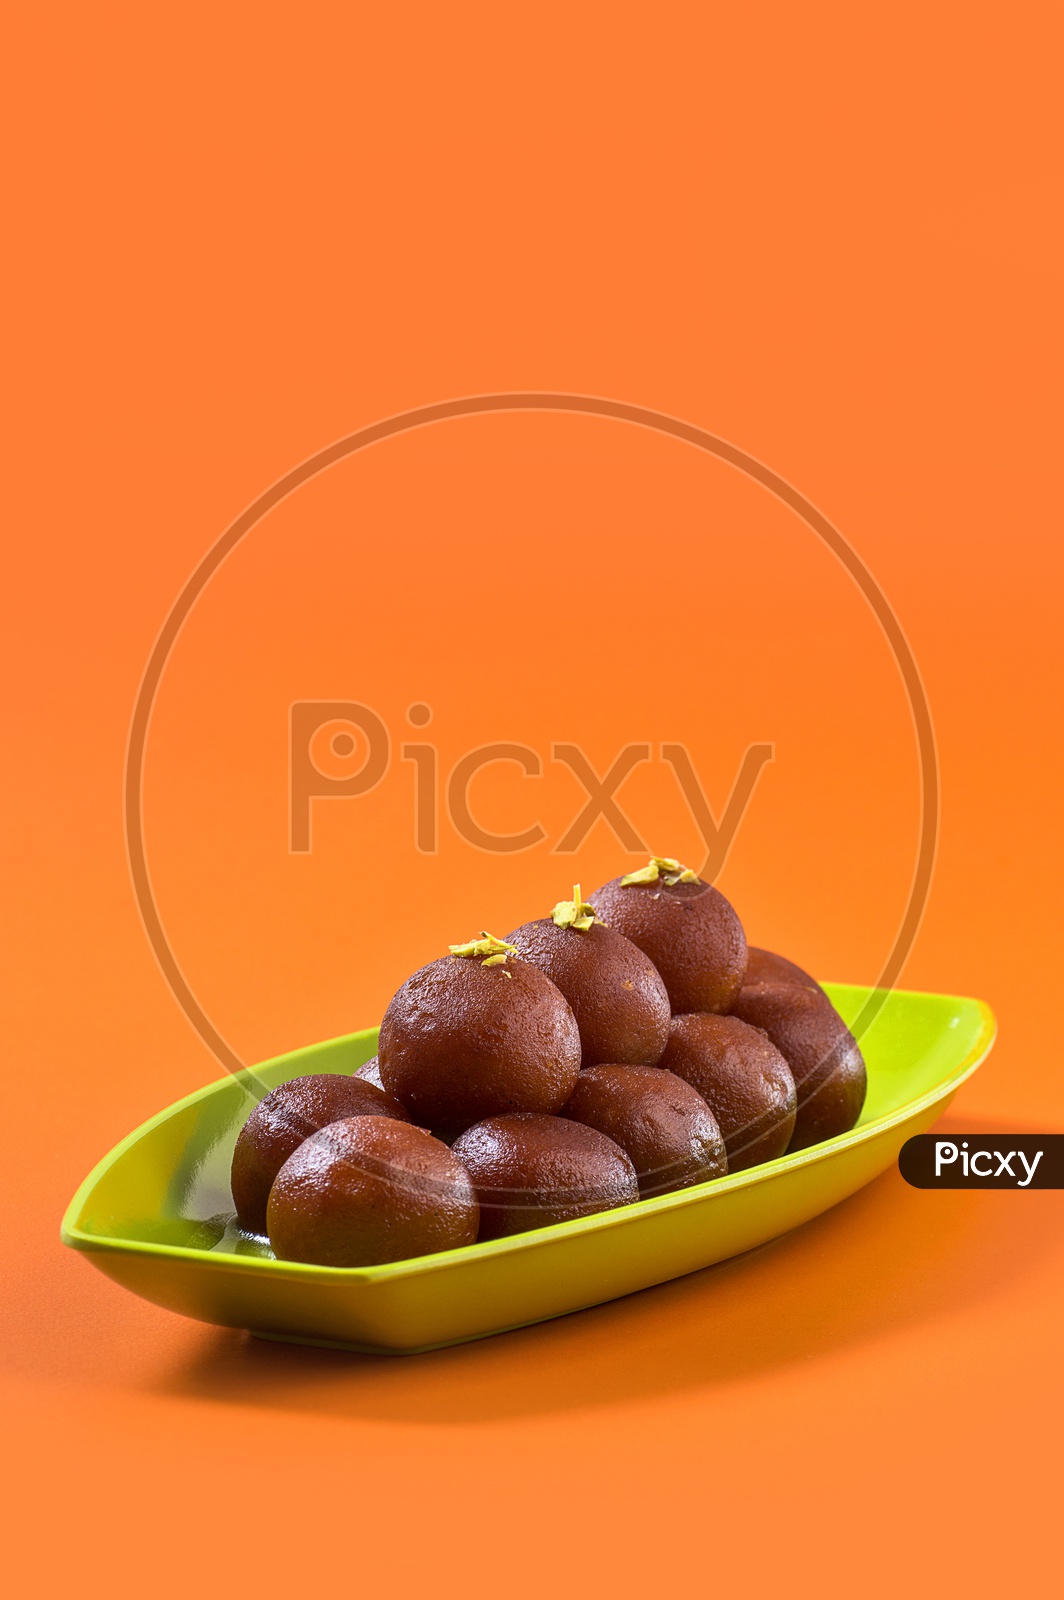 Image of Indian Dessert or Sweet Dish Gulab Jamun topped with Pistachio ...